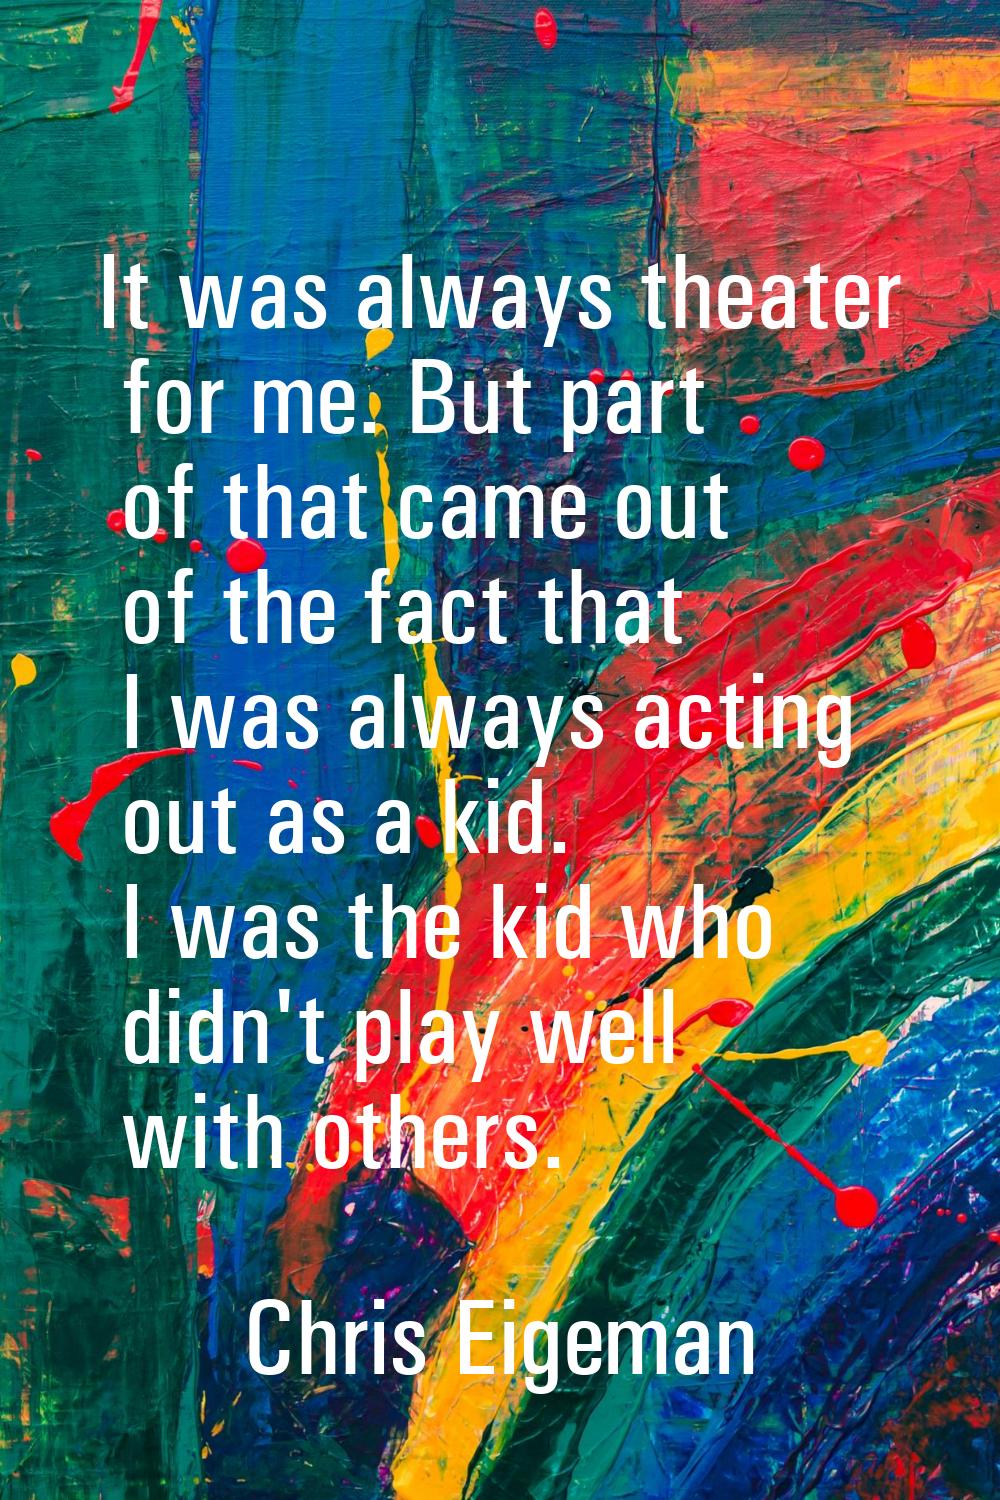 It was always theater for me. But part of that came out of the fact that I was always acting out as